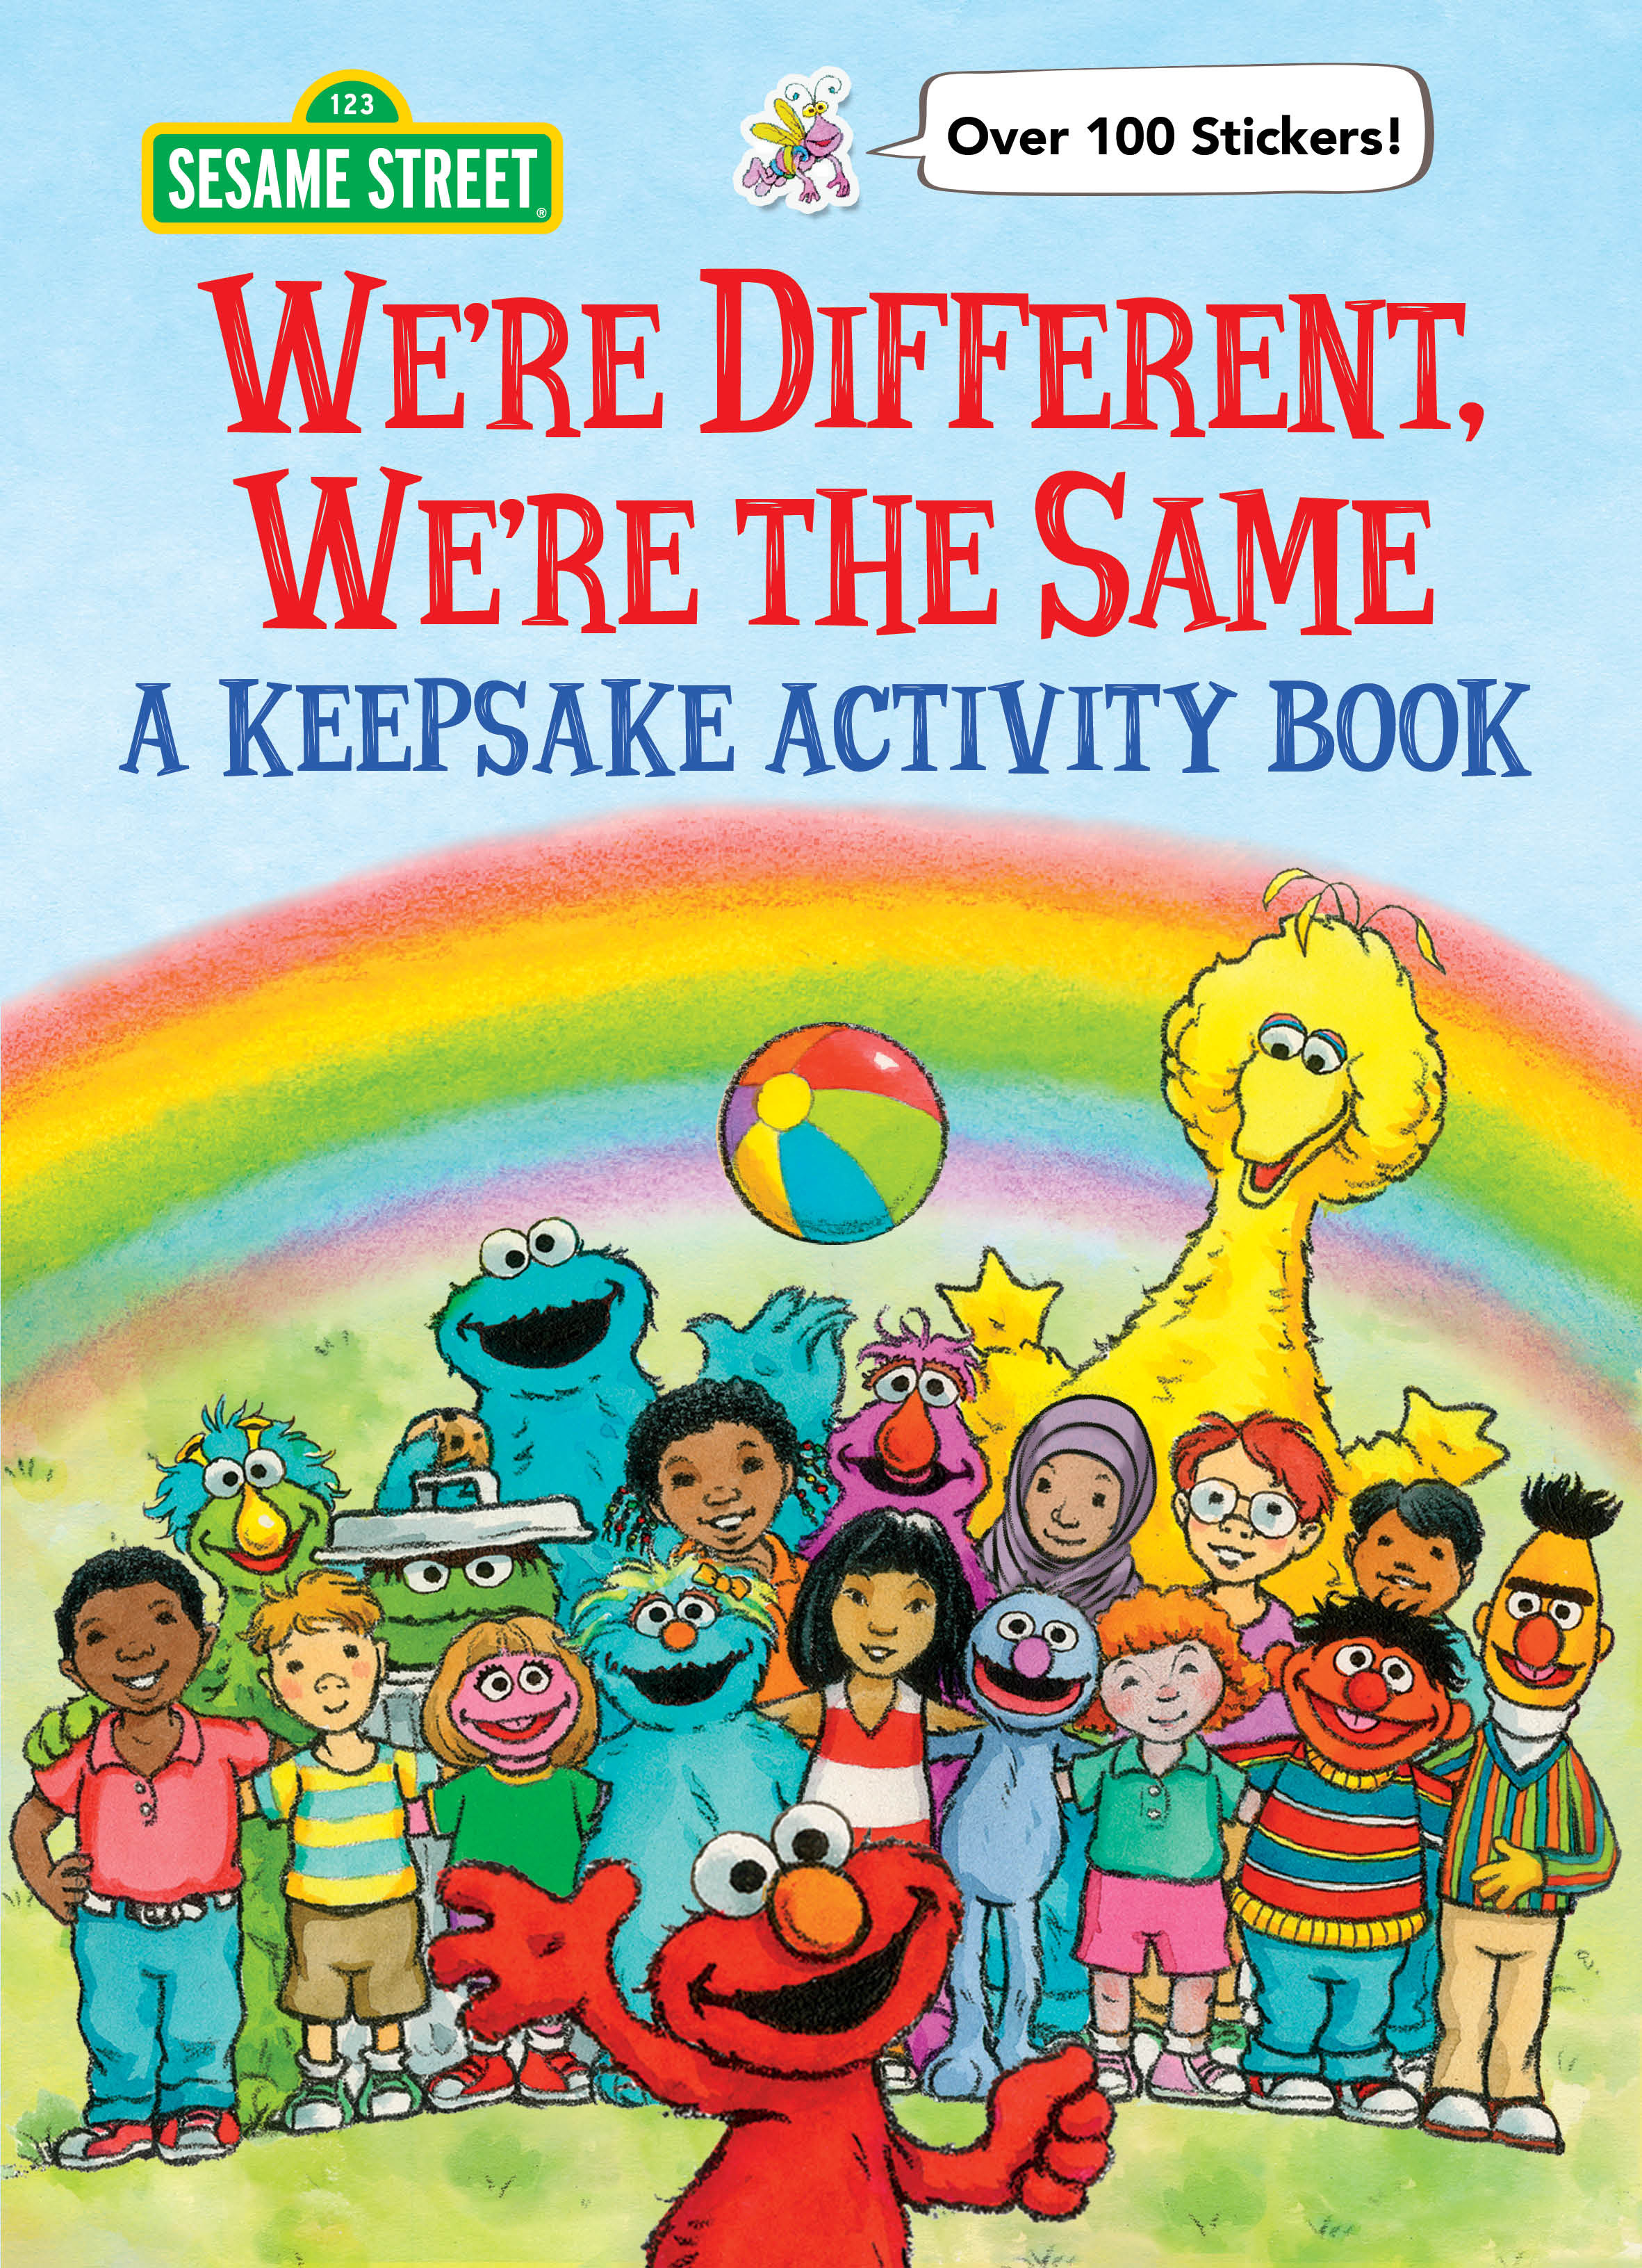 We're Different, We're the Same A Keepsake Activity Book (Sesame Street) | Activity book